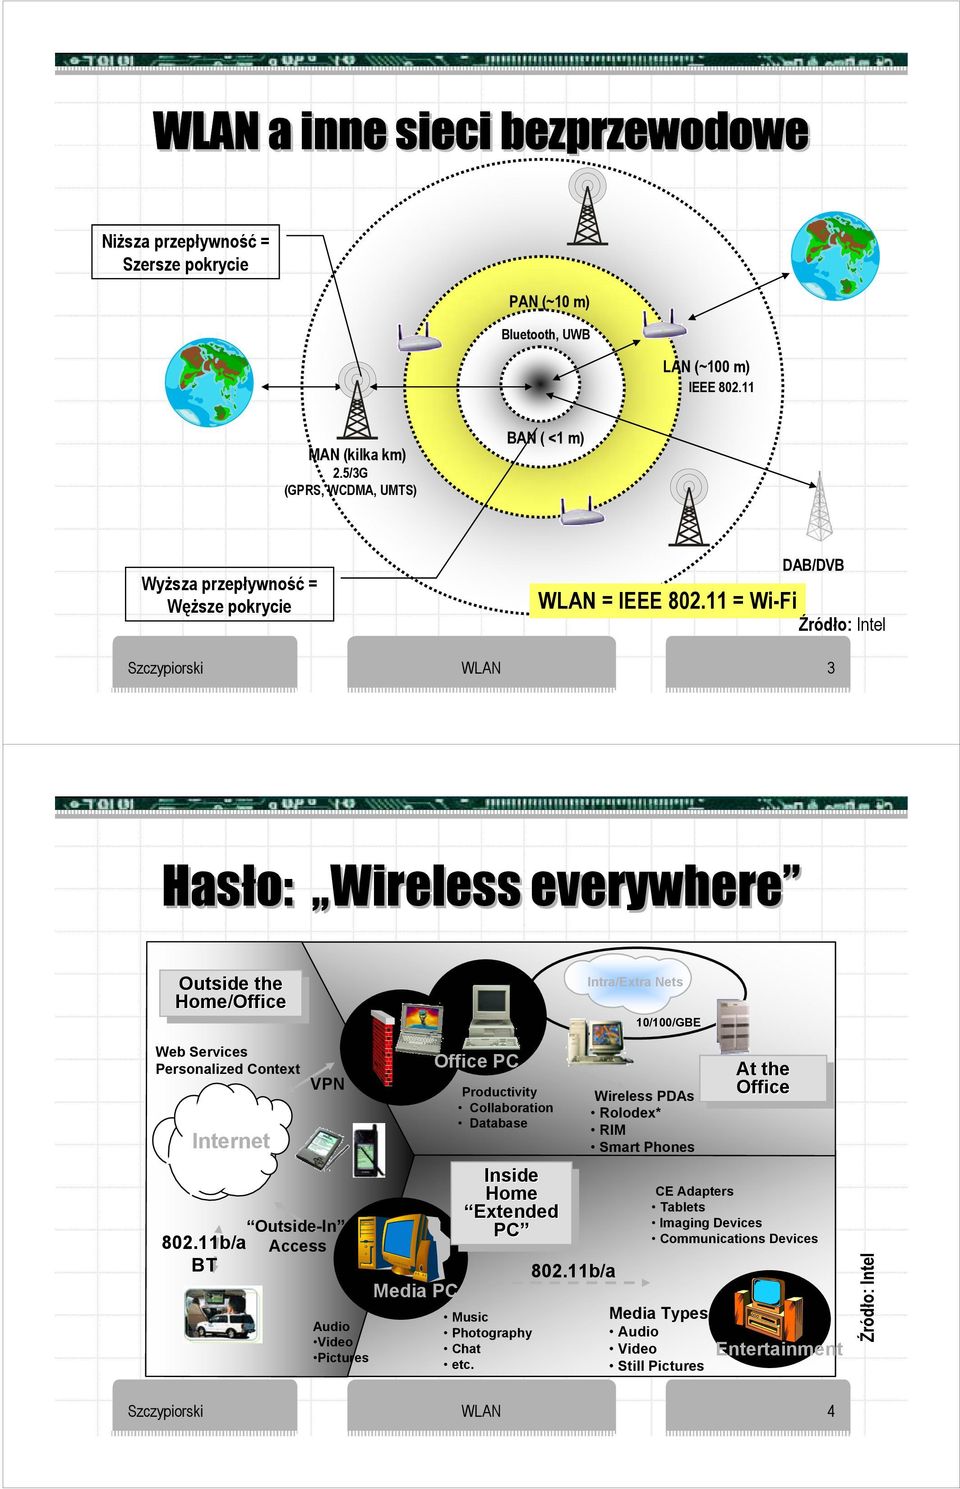 11 = Wi-Fi Źródło: Intel Szczypiorski WLAN 3 Hasło: Wireless everywhere Outside Outside the the Home/Office Home/Office Intra/Extra Nets 10/100/GBE Web Services Personalized Context Internet VPN